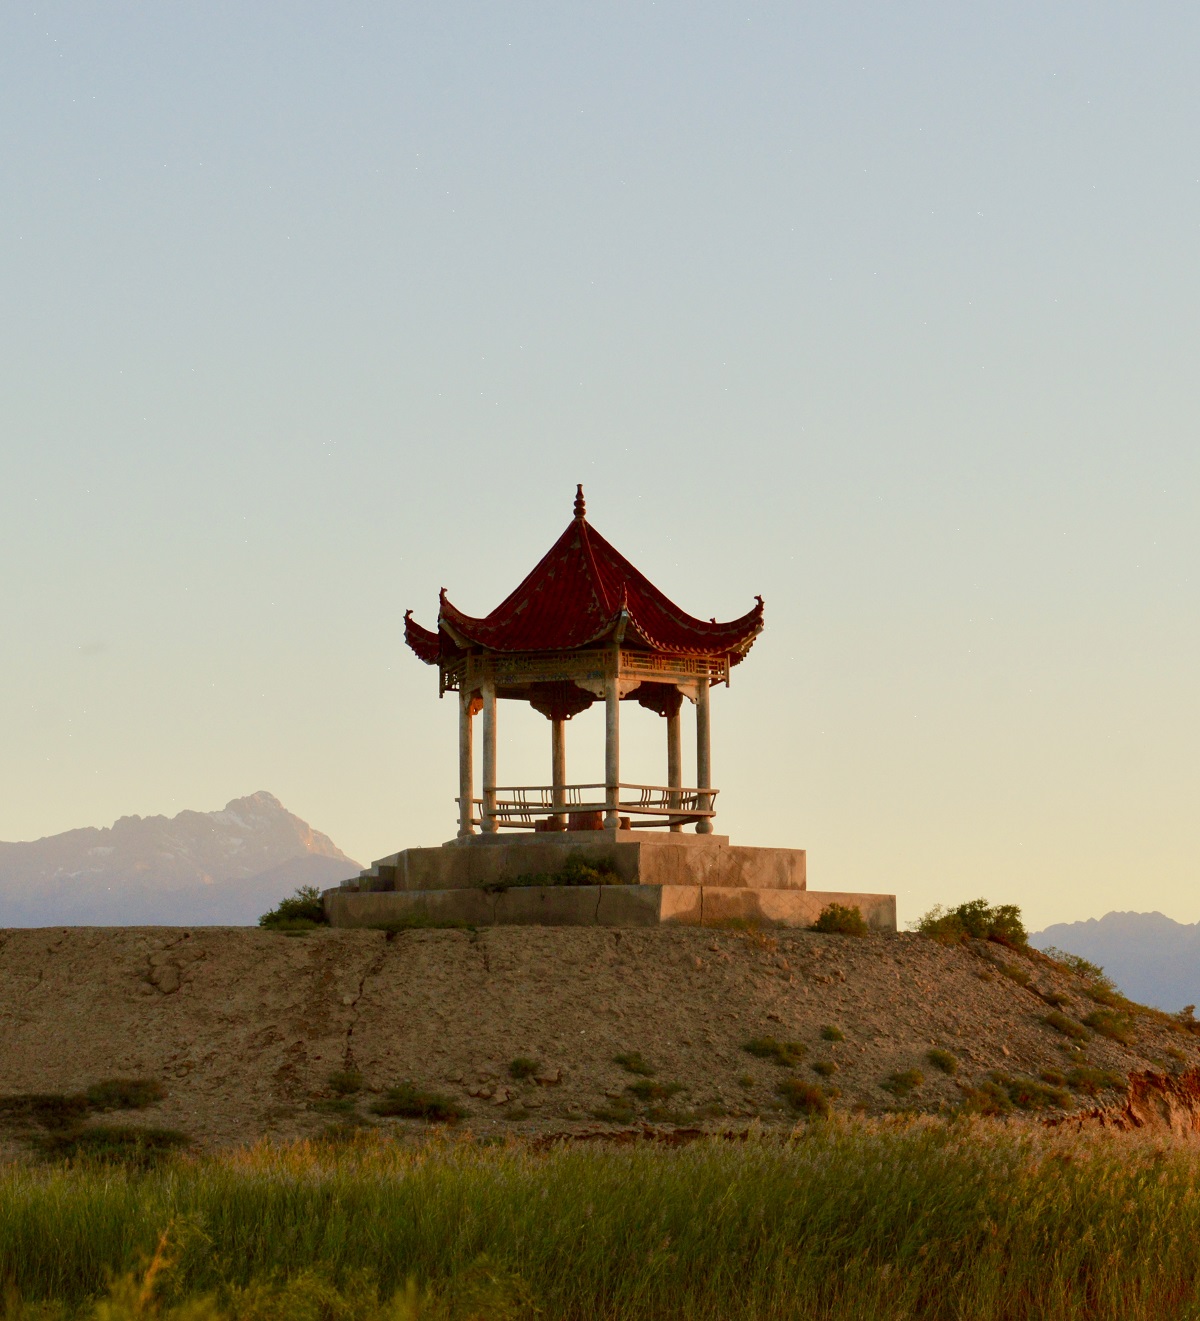 A red pagoda sits on a hill and is backlit by the orange sunrise.